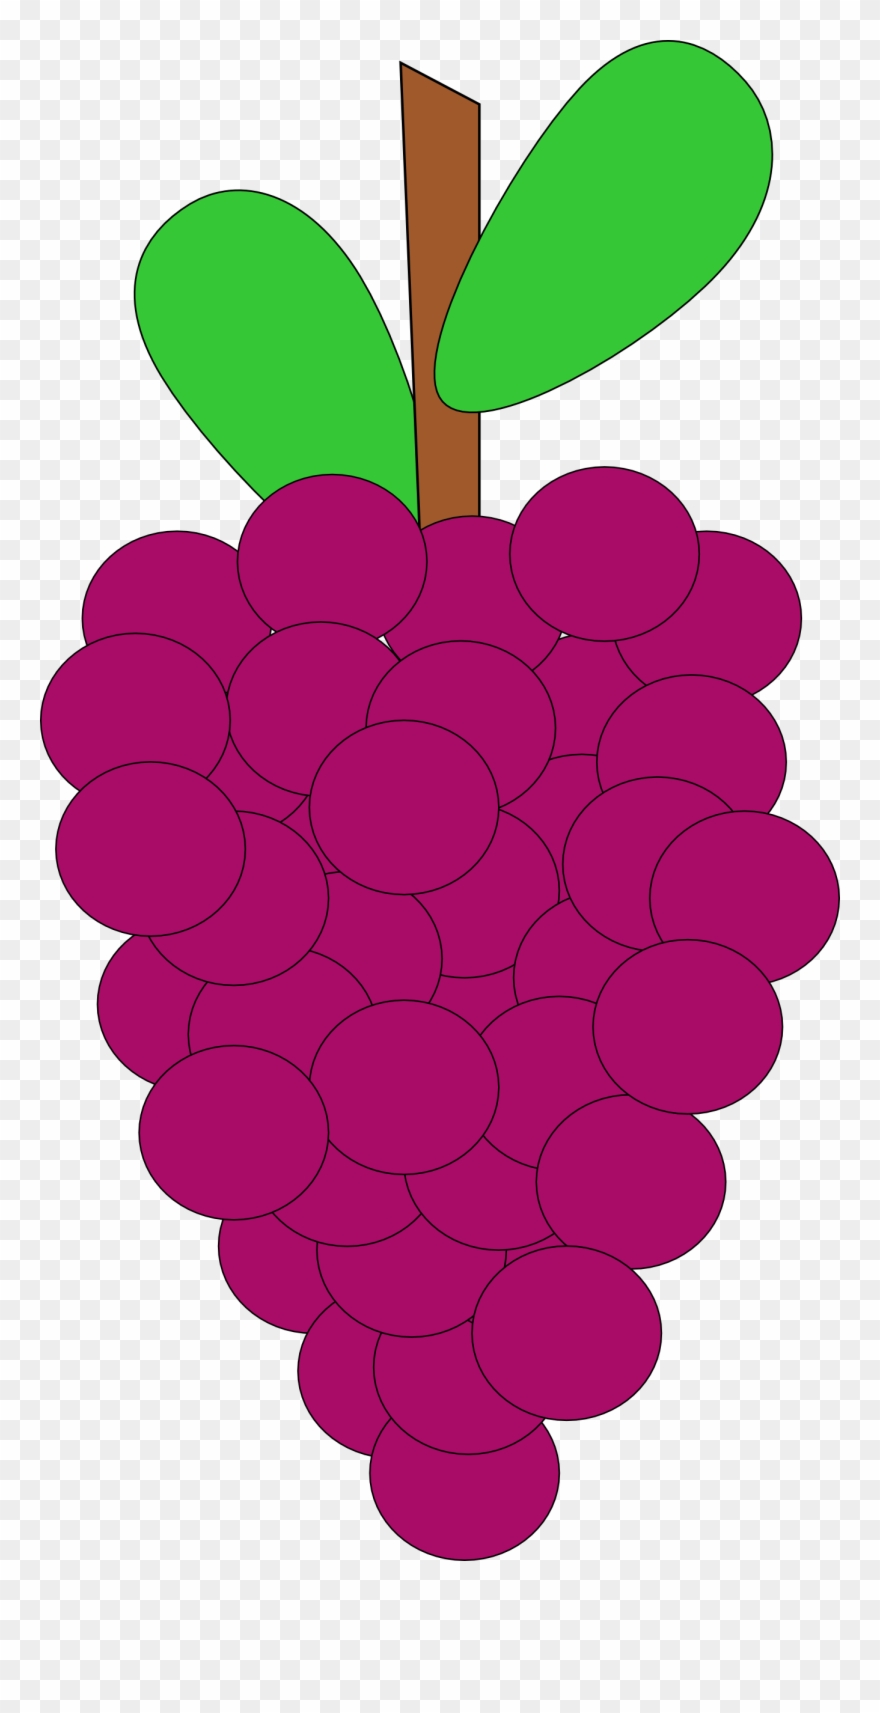 Grapes clipart animated.